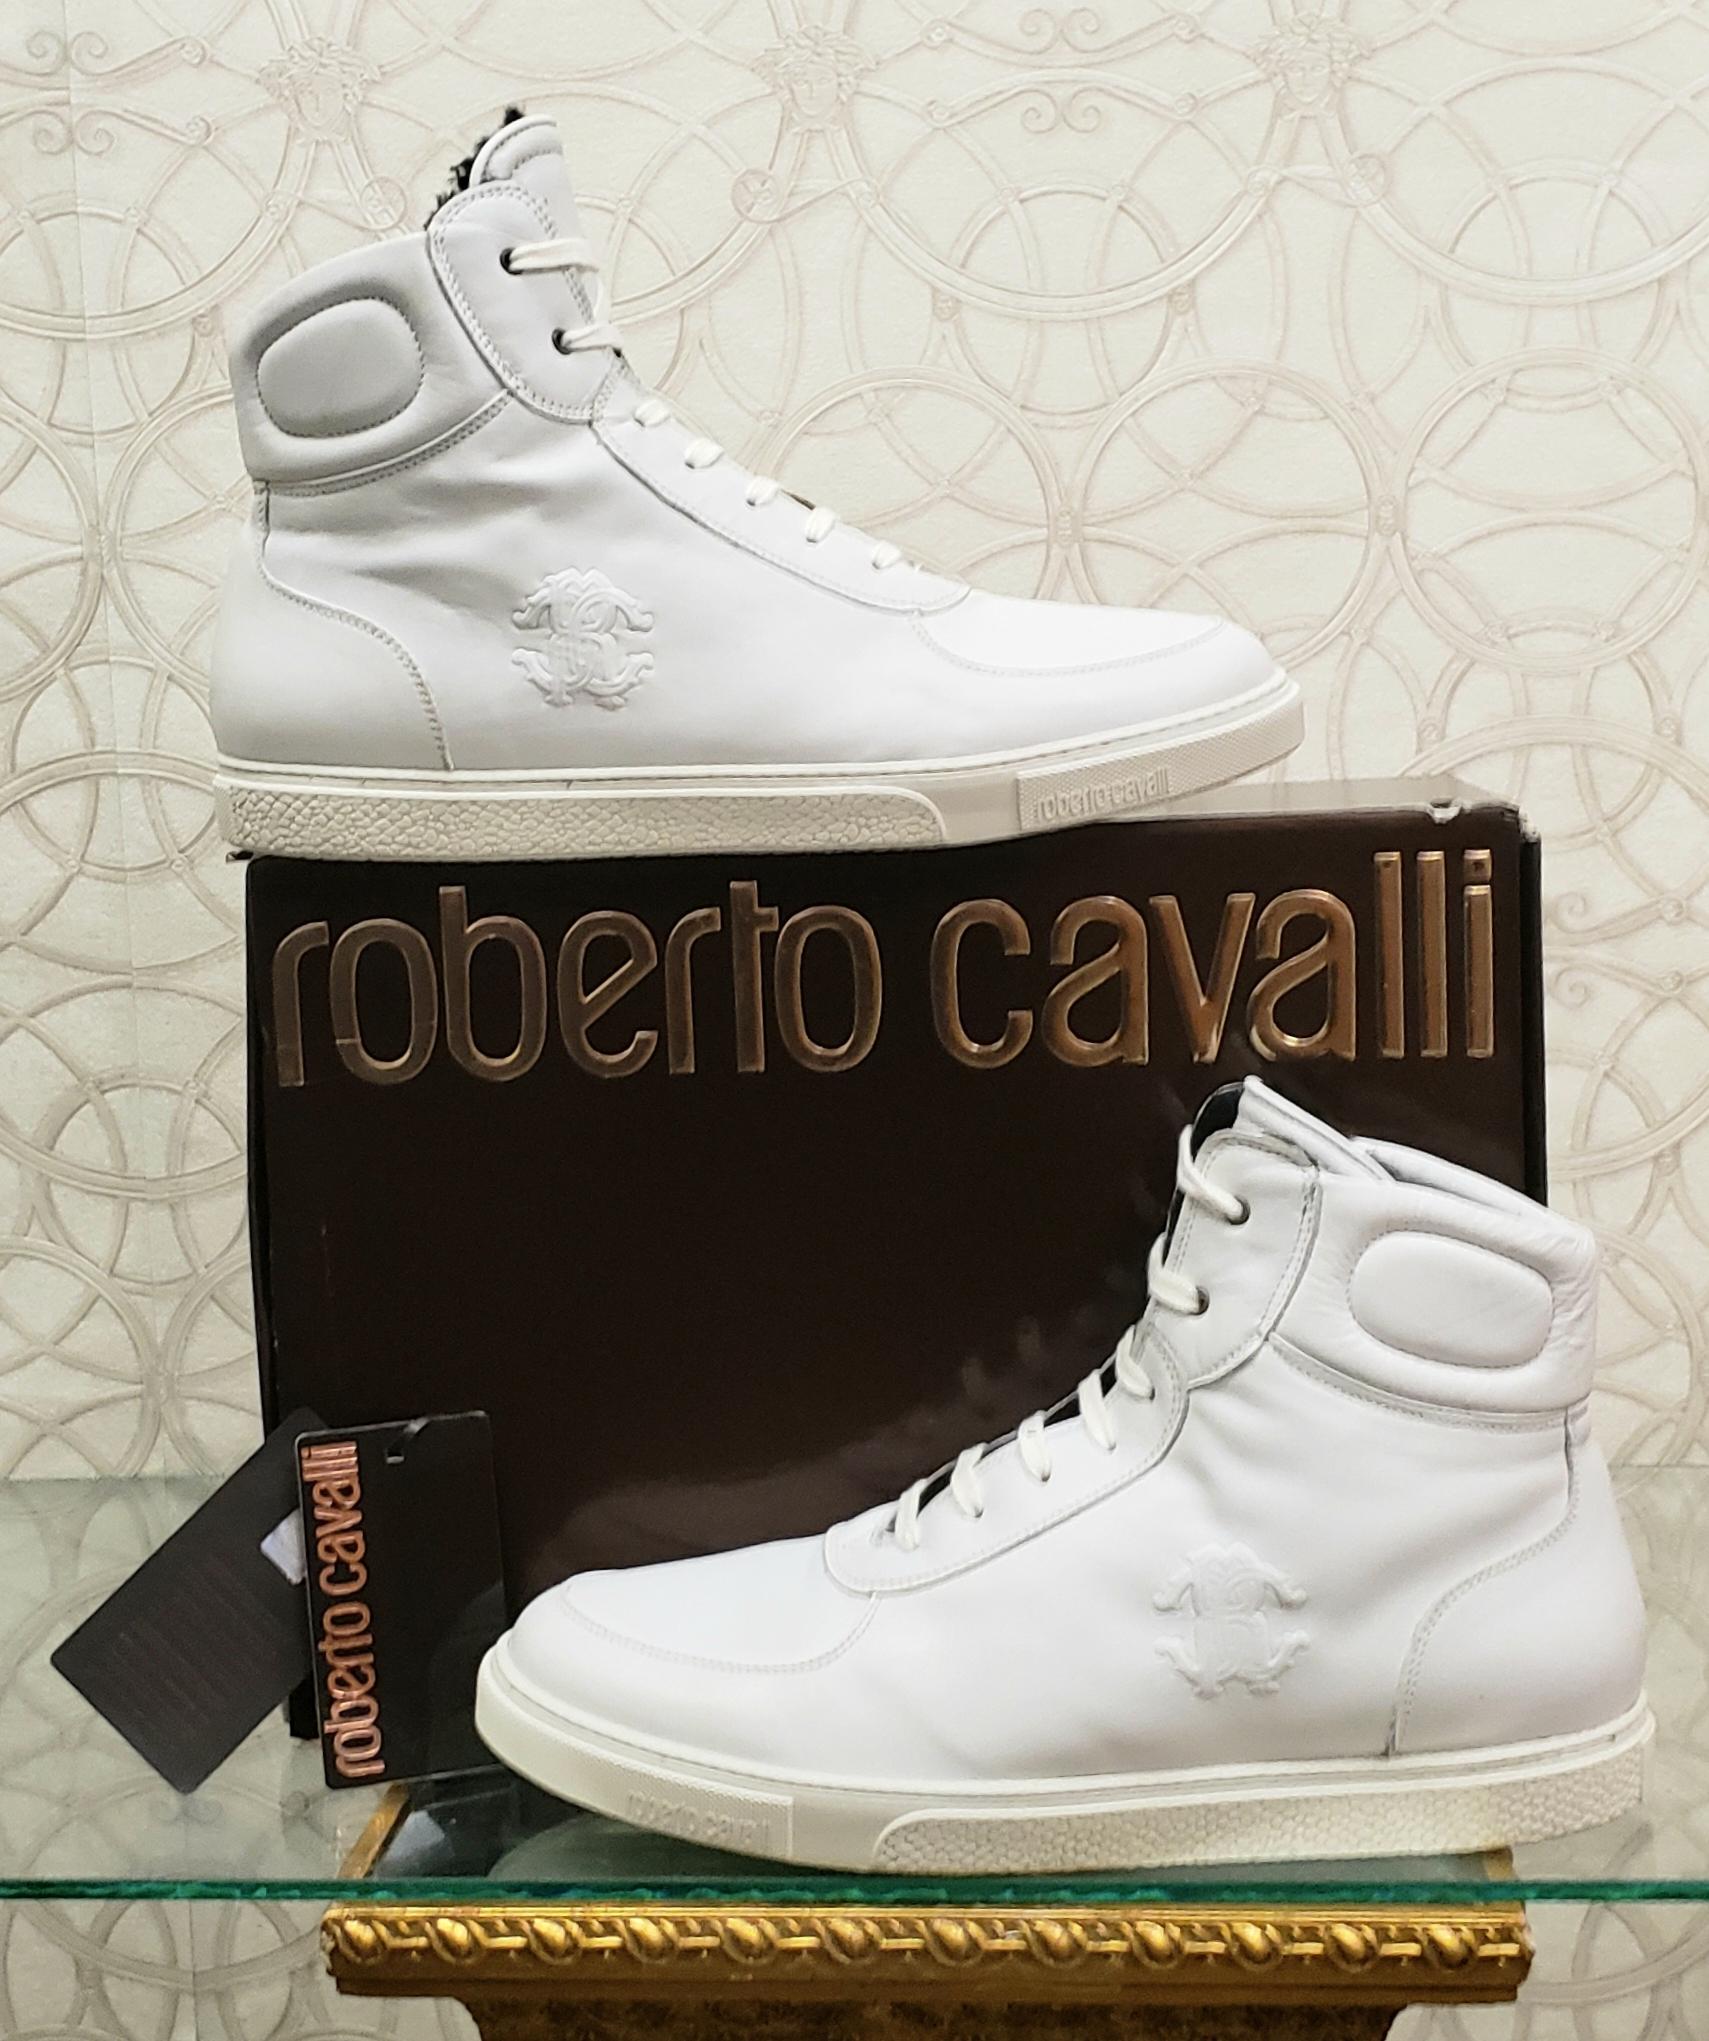 ROBERTO CAVALLI 

MEN'S HIGH TOP SNEAKERS



Color: White

Content: 100% Genuine leather

Rubber sole

Cavalli logo

Fur lining


Made in Italy
  
The box and dust bag are included.





PLEASE VISIT OUR STORE FOR MORE GREAT ITEMS
 
